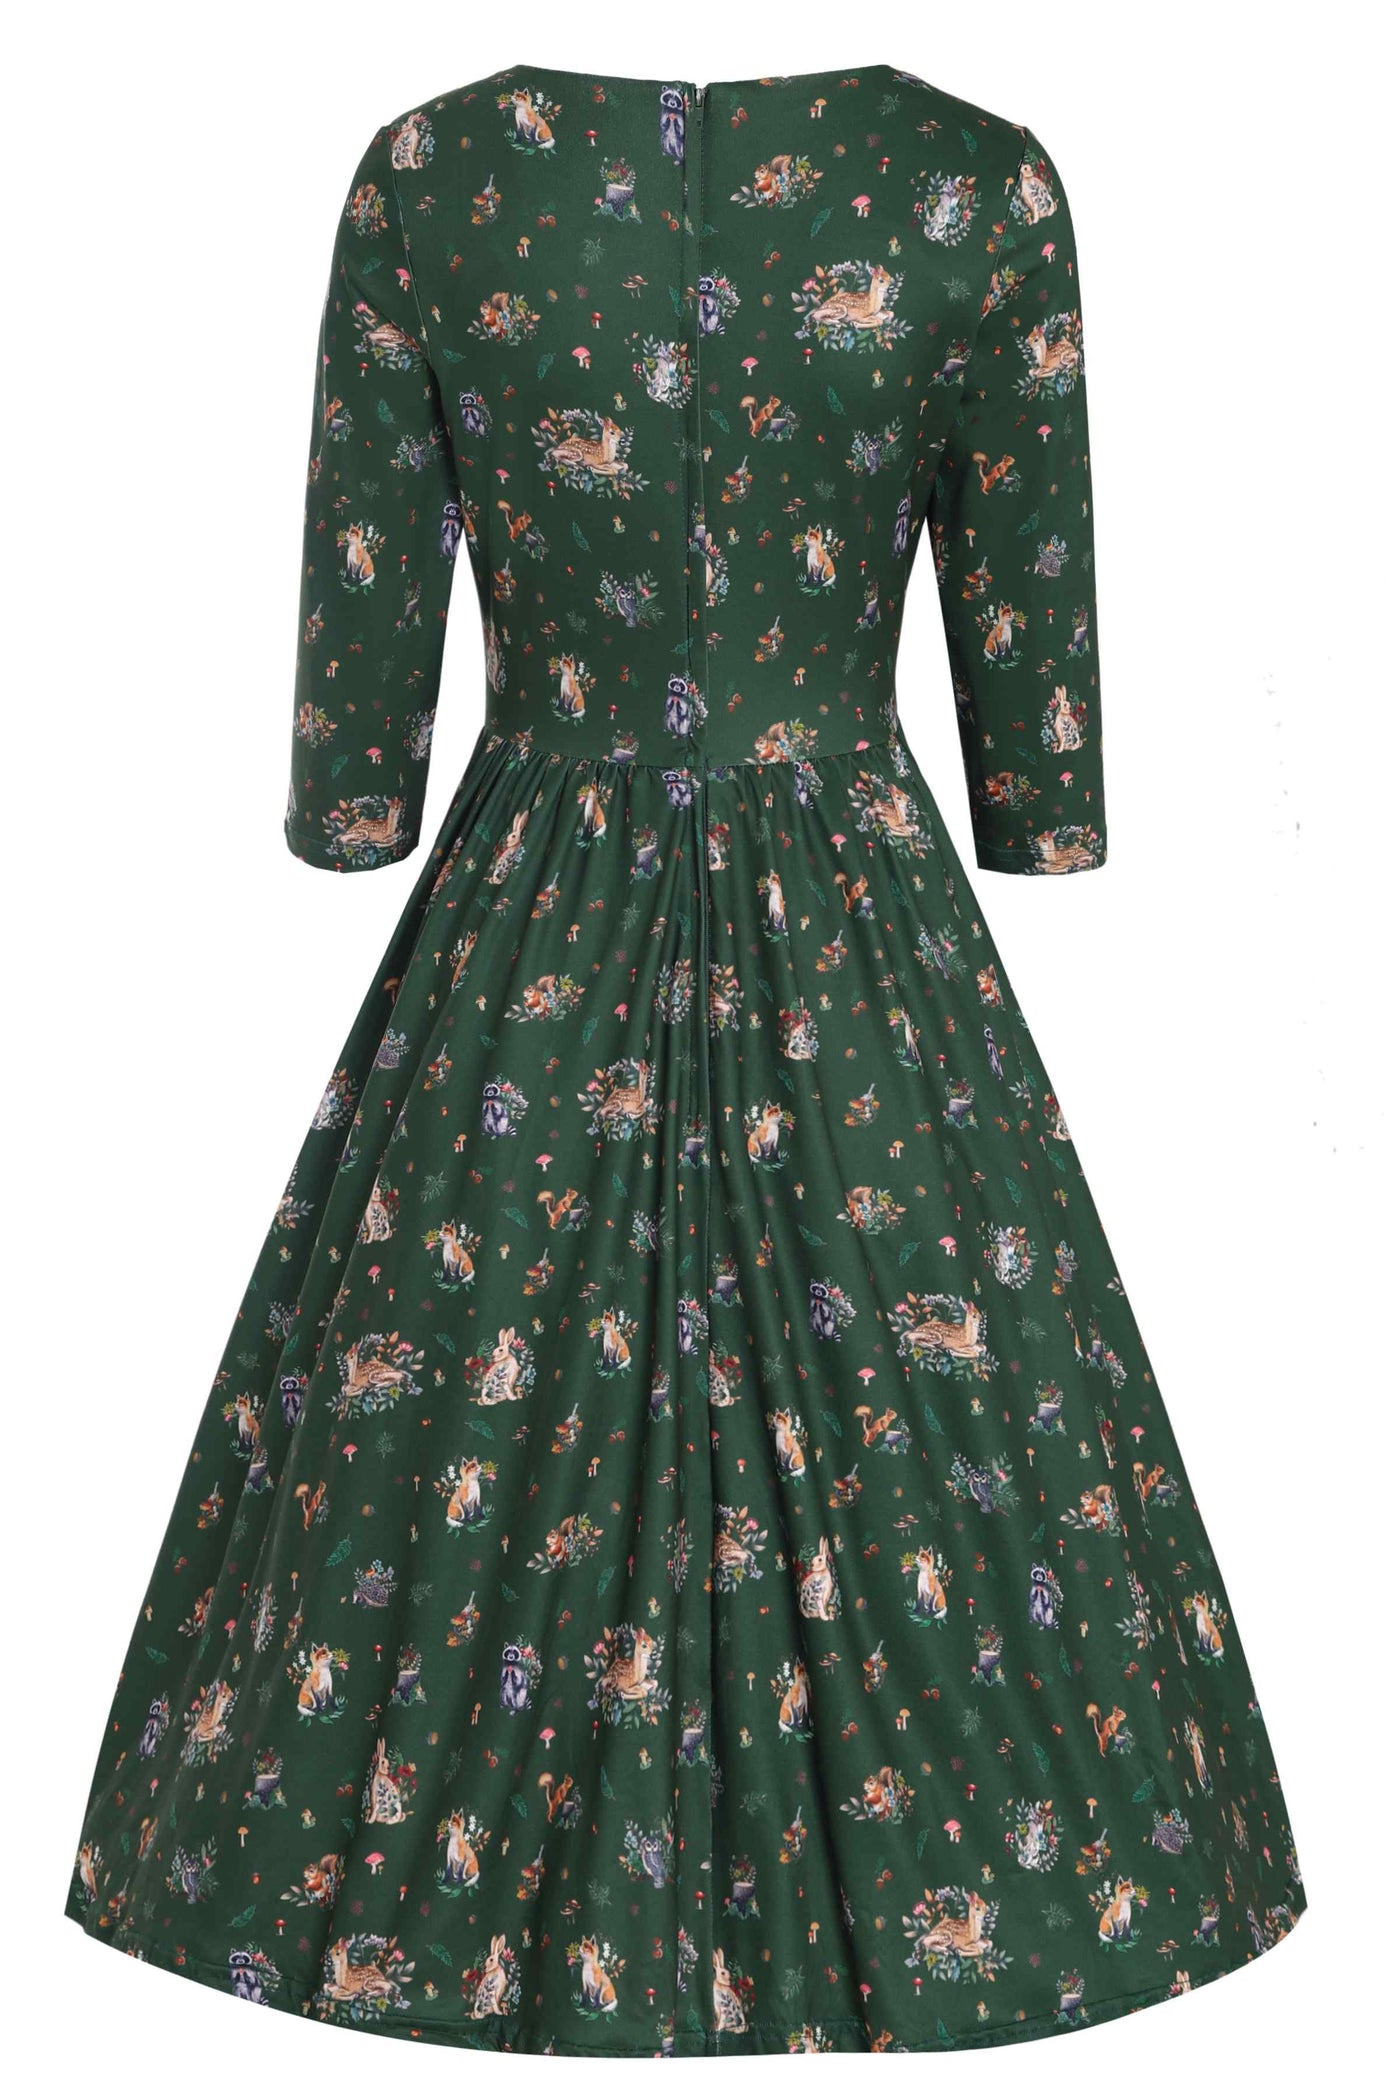 Back View of Lovely Woodland Fox and Owl Print Dress in Green